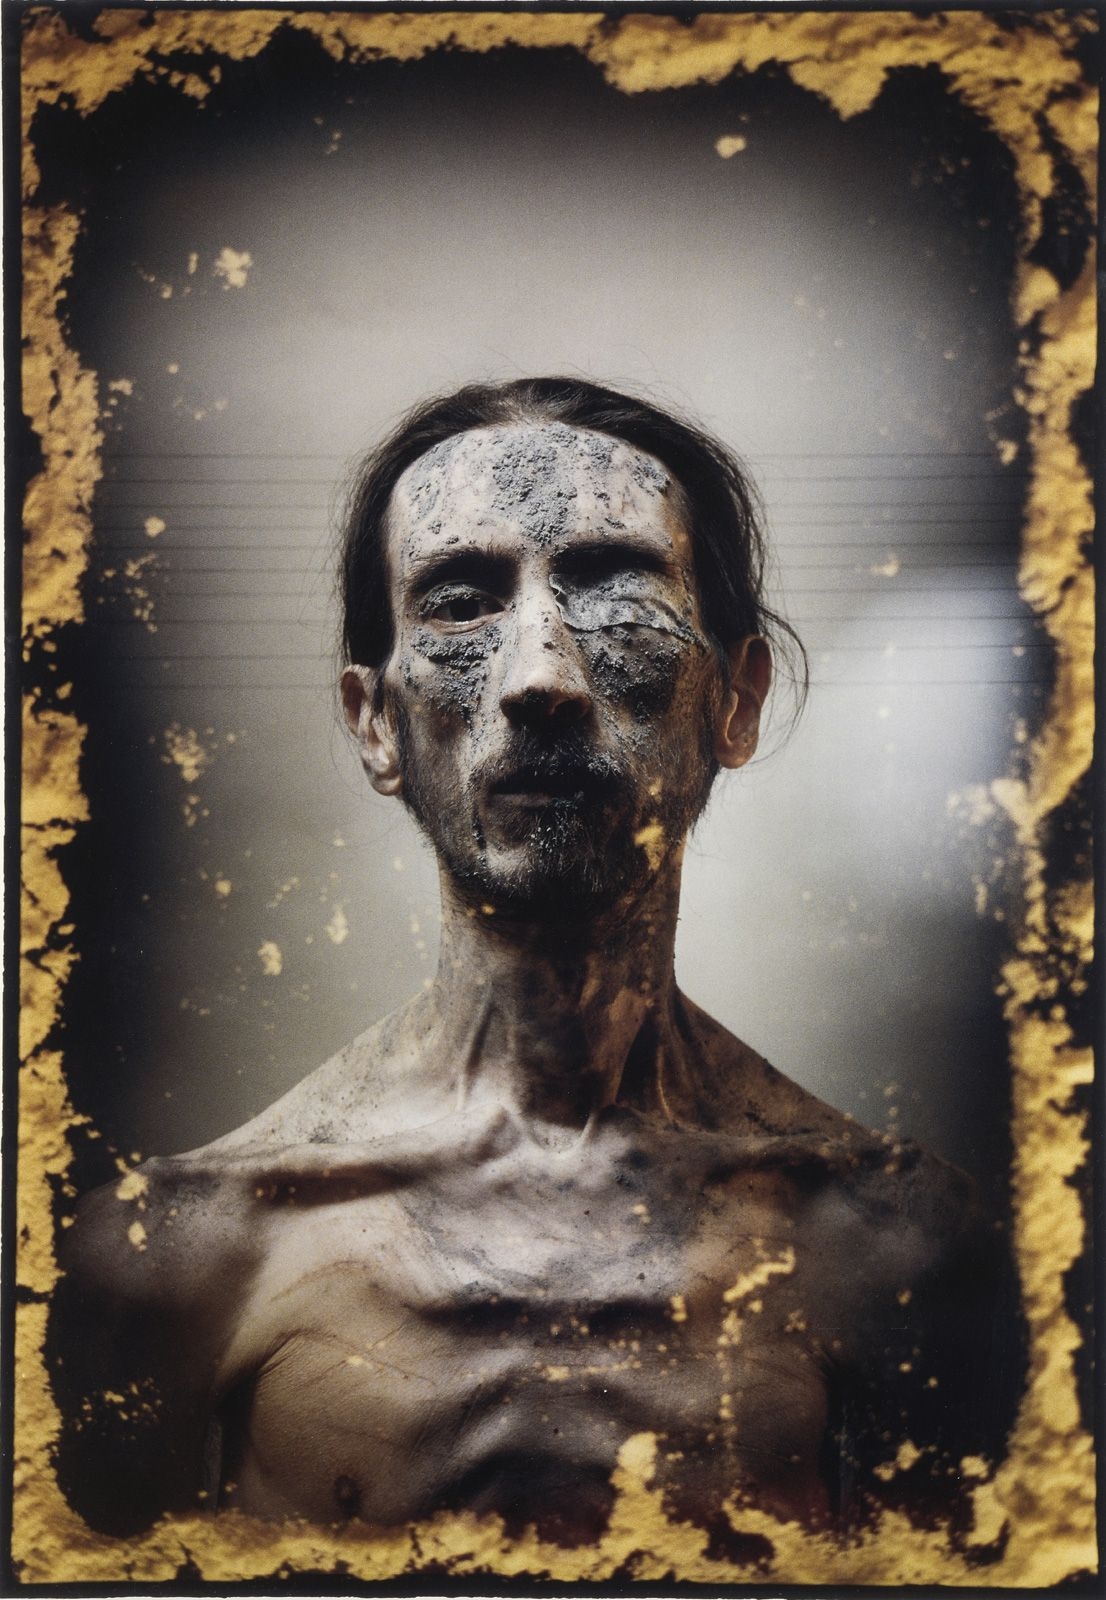 The mirror, ash, excrement, alpha and omega on the forehead, Self-Portrait series by David Nebreda, 1989